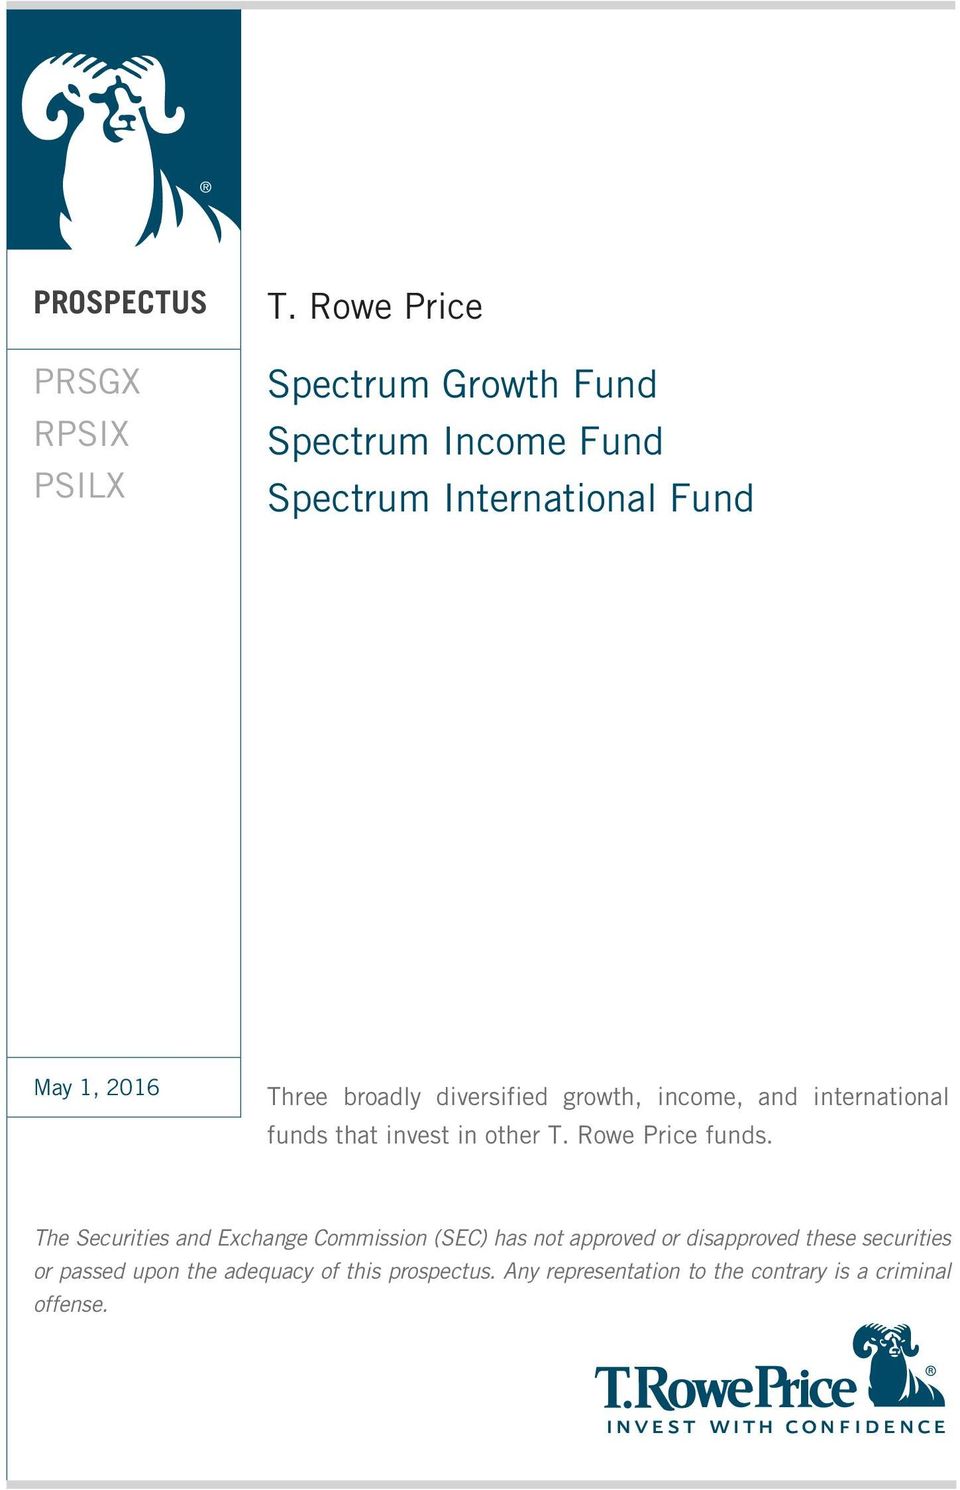 diversified growth, income, and international funds that invest in other T. Rowe Price funds.